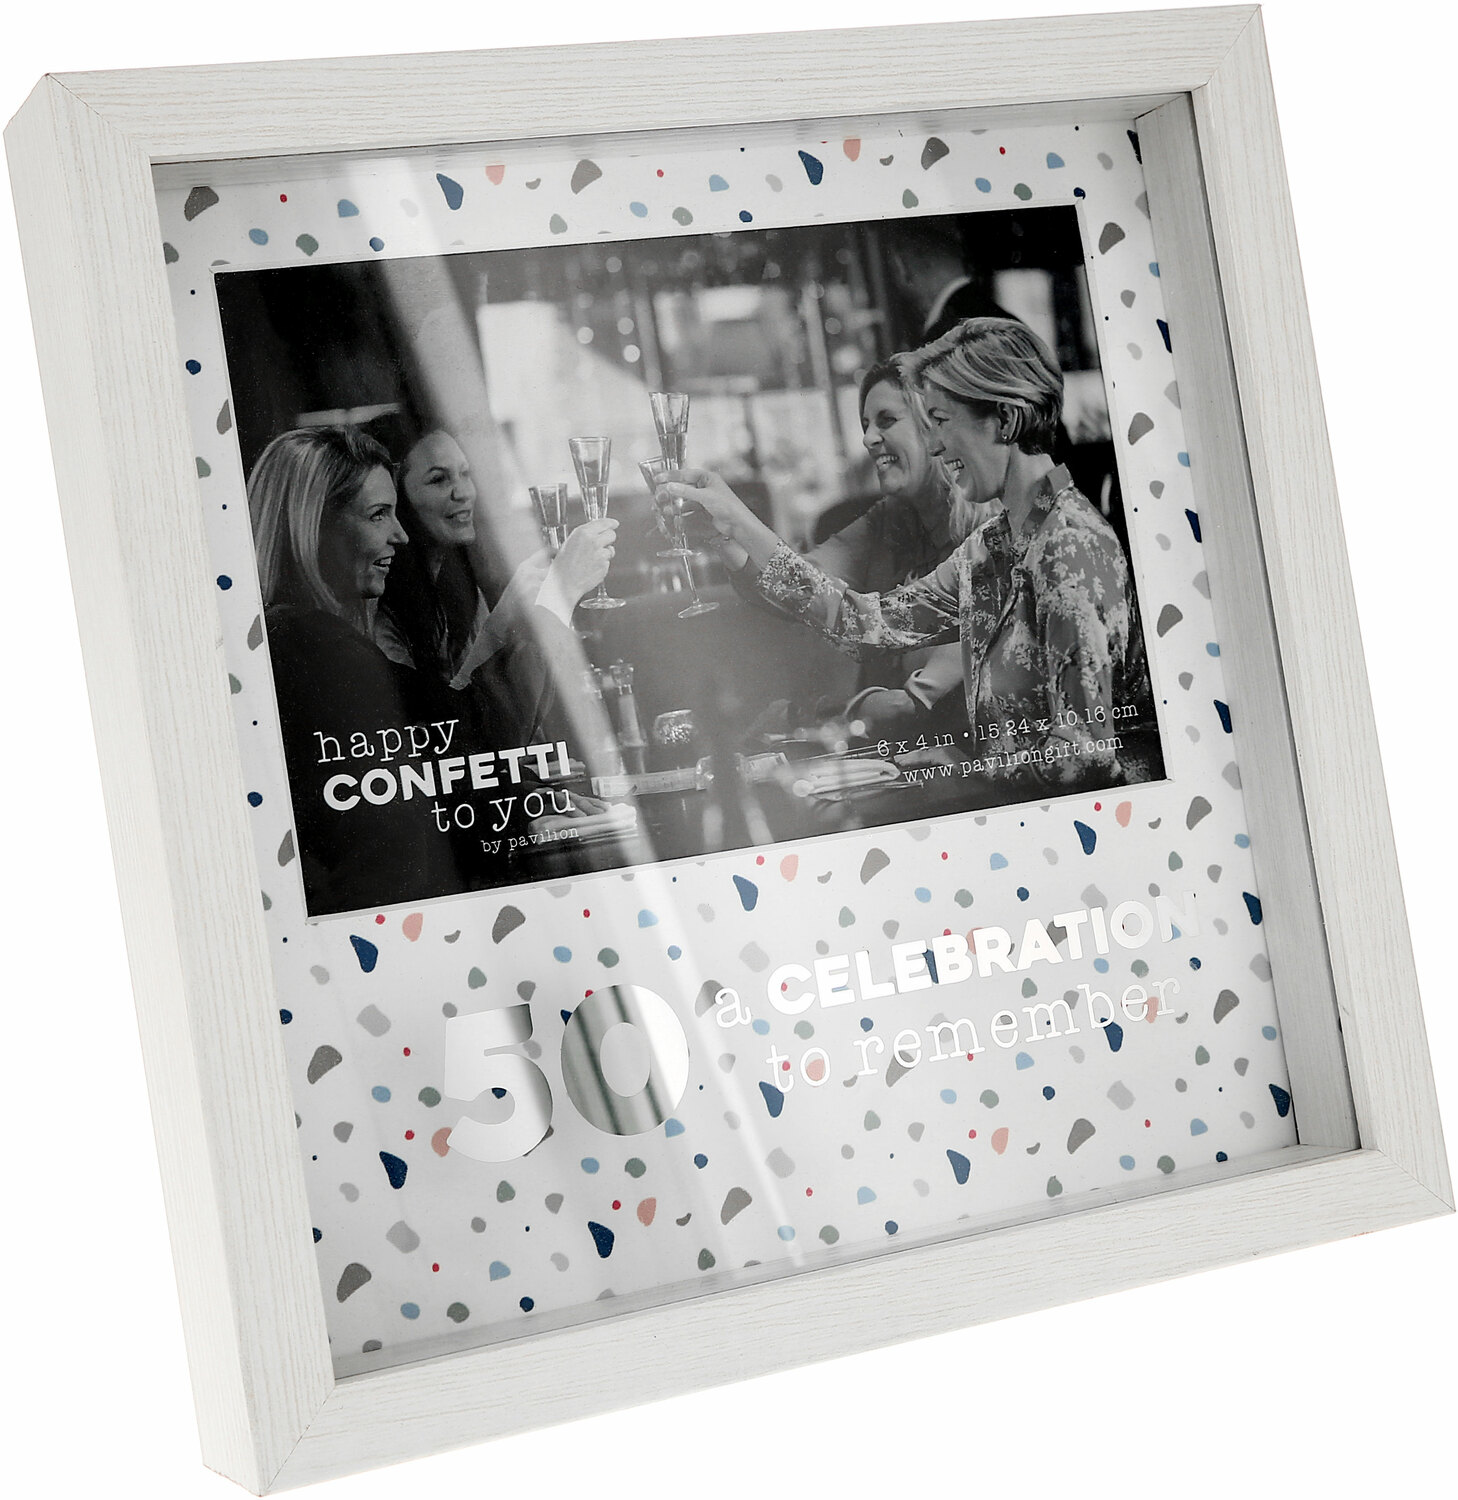 50 by Happy Confetti to You - 50 - 7.5" Shadow Box Frame
(Holds 6" x 4" Photo)